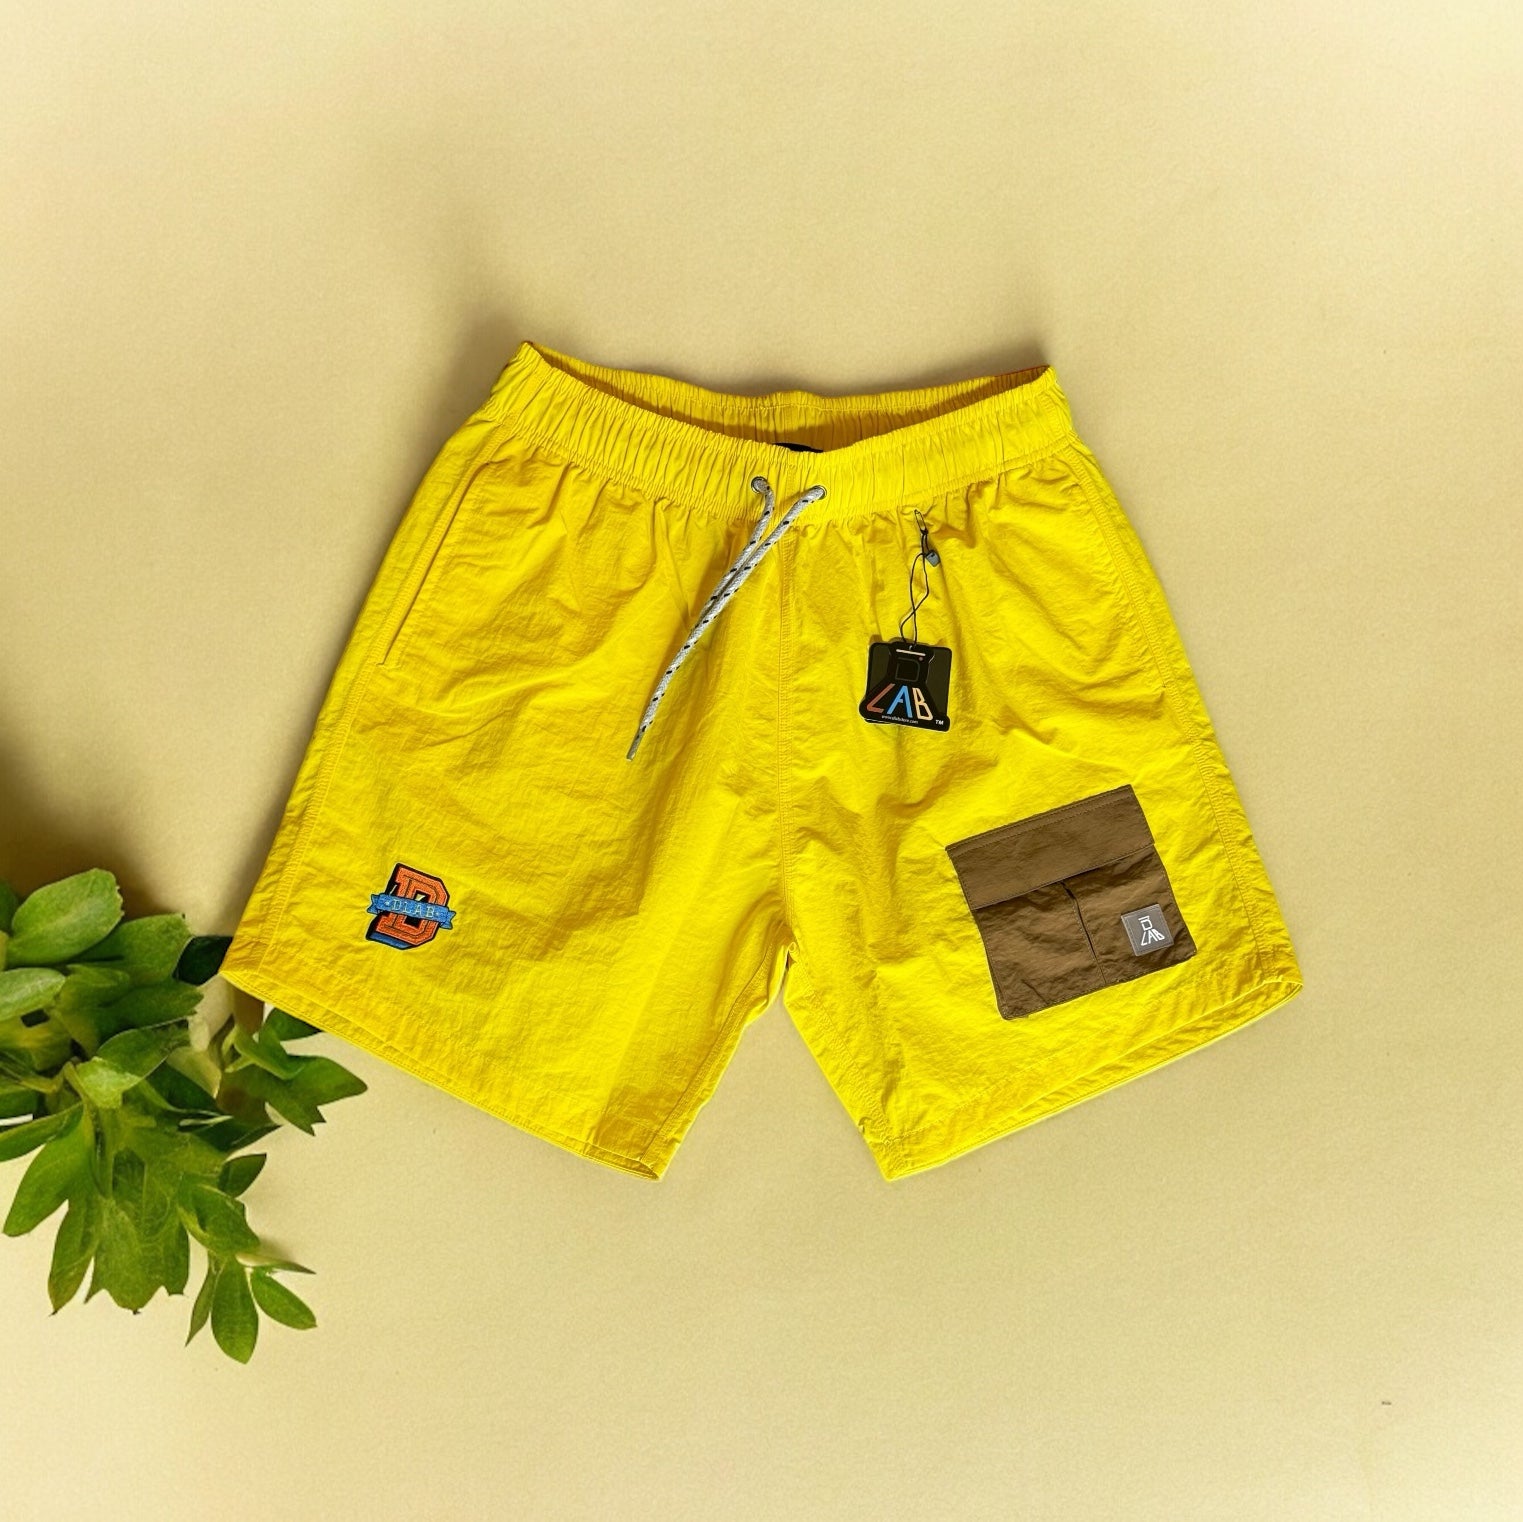 DLAB Hybrid Shorts Yellow with Brown Pocket